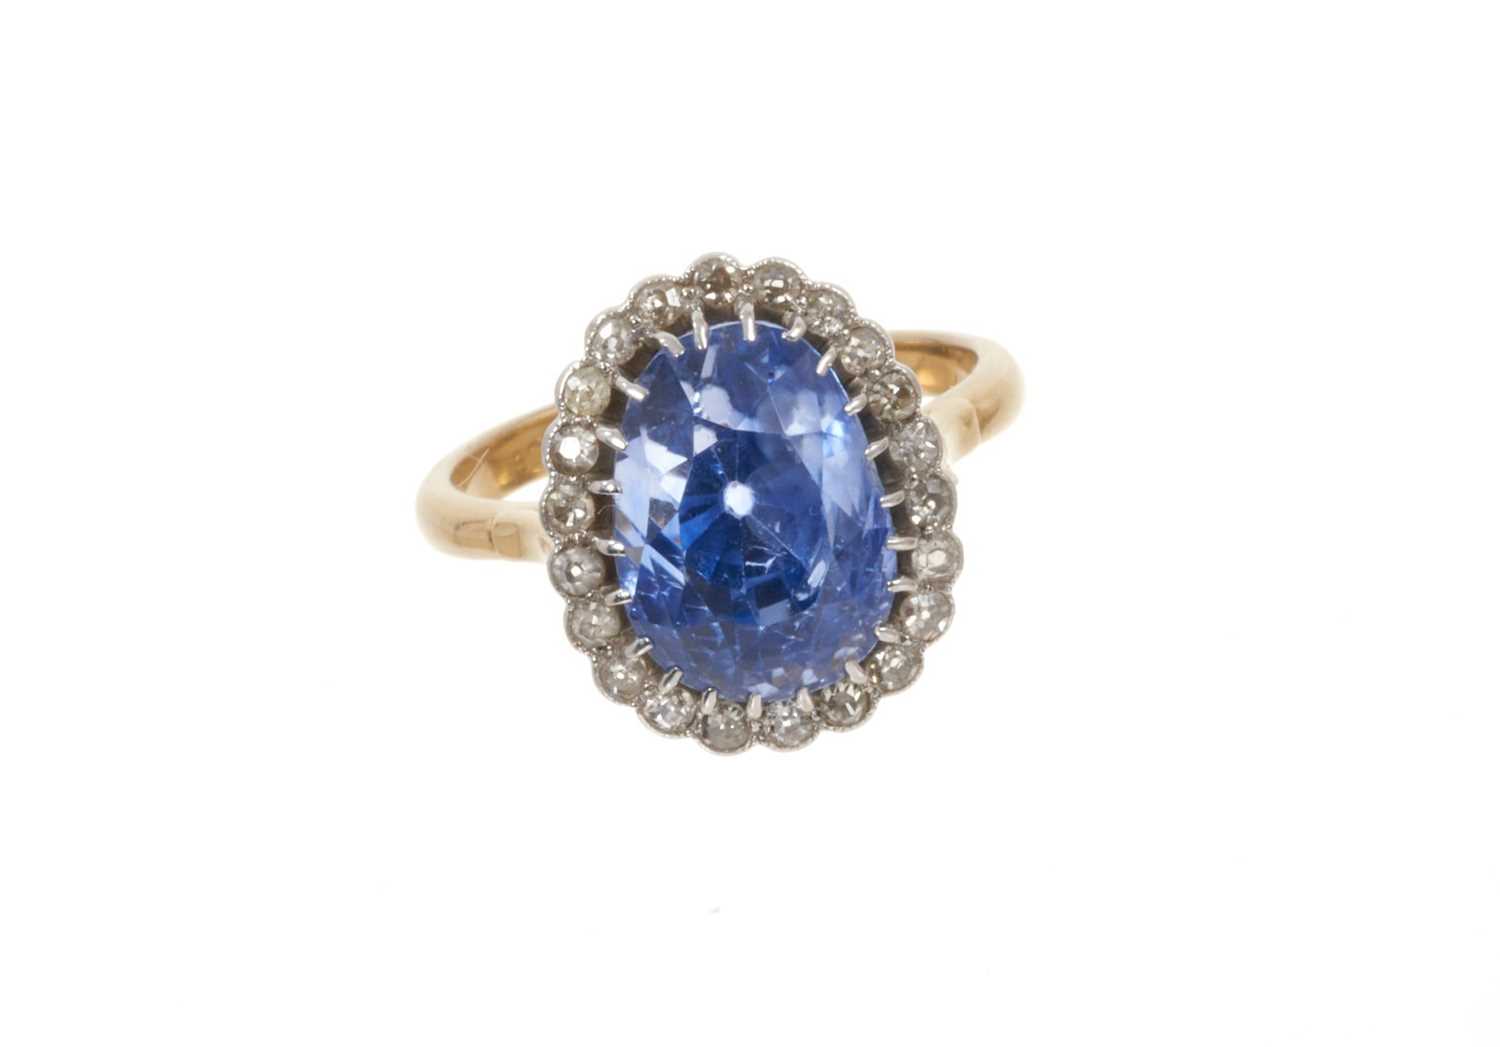 Lot 699 - Sapphire and diamond cluster ring with a pear-cut cornflower blue sapphire measuring approximately 12.1mm x 8.8mm x 11.3mm surrounded by a border of old cut and single cut diamonds in platinum sett...